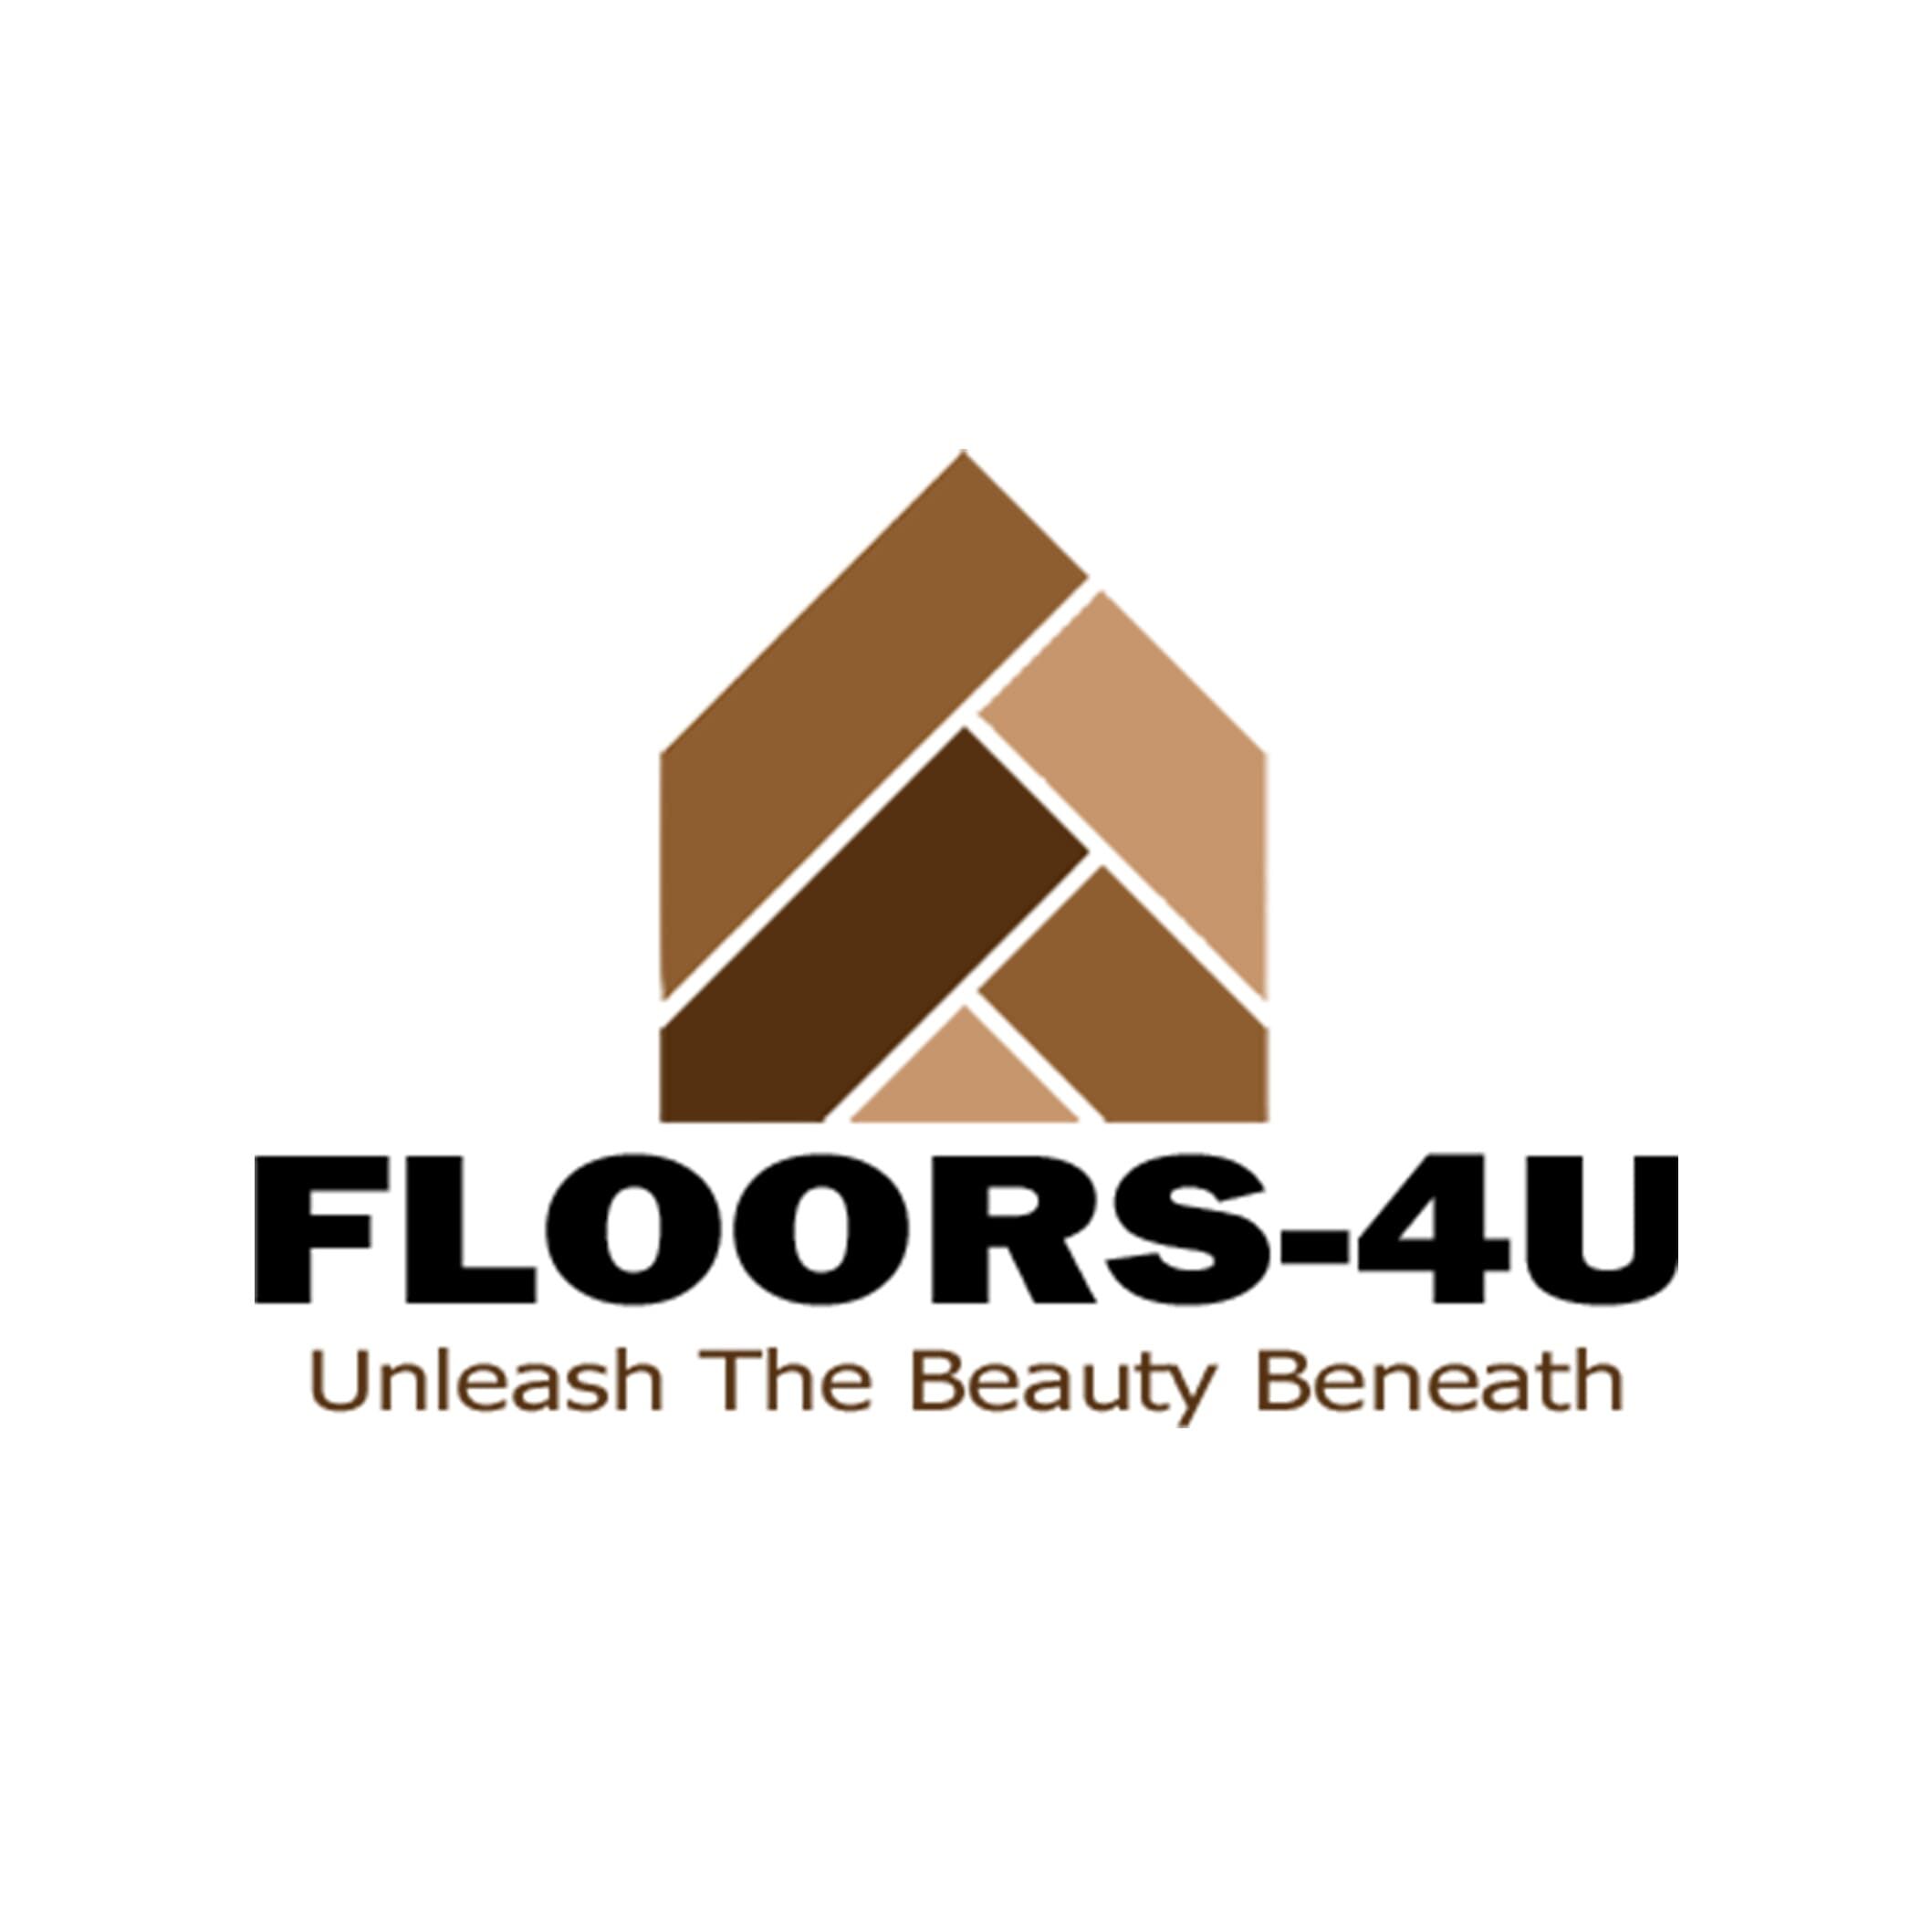 brown planks representing flooring with the text FLOORS-4U and a slogan saying unleash the beauty beneath.